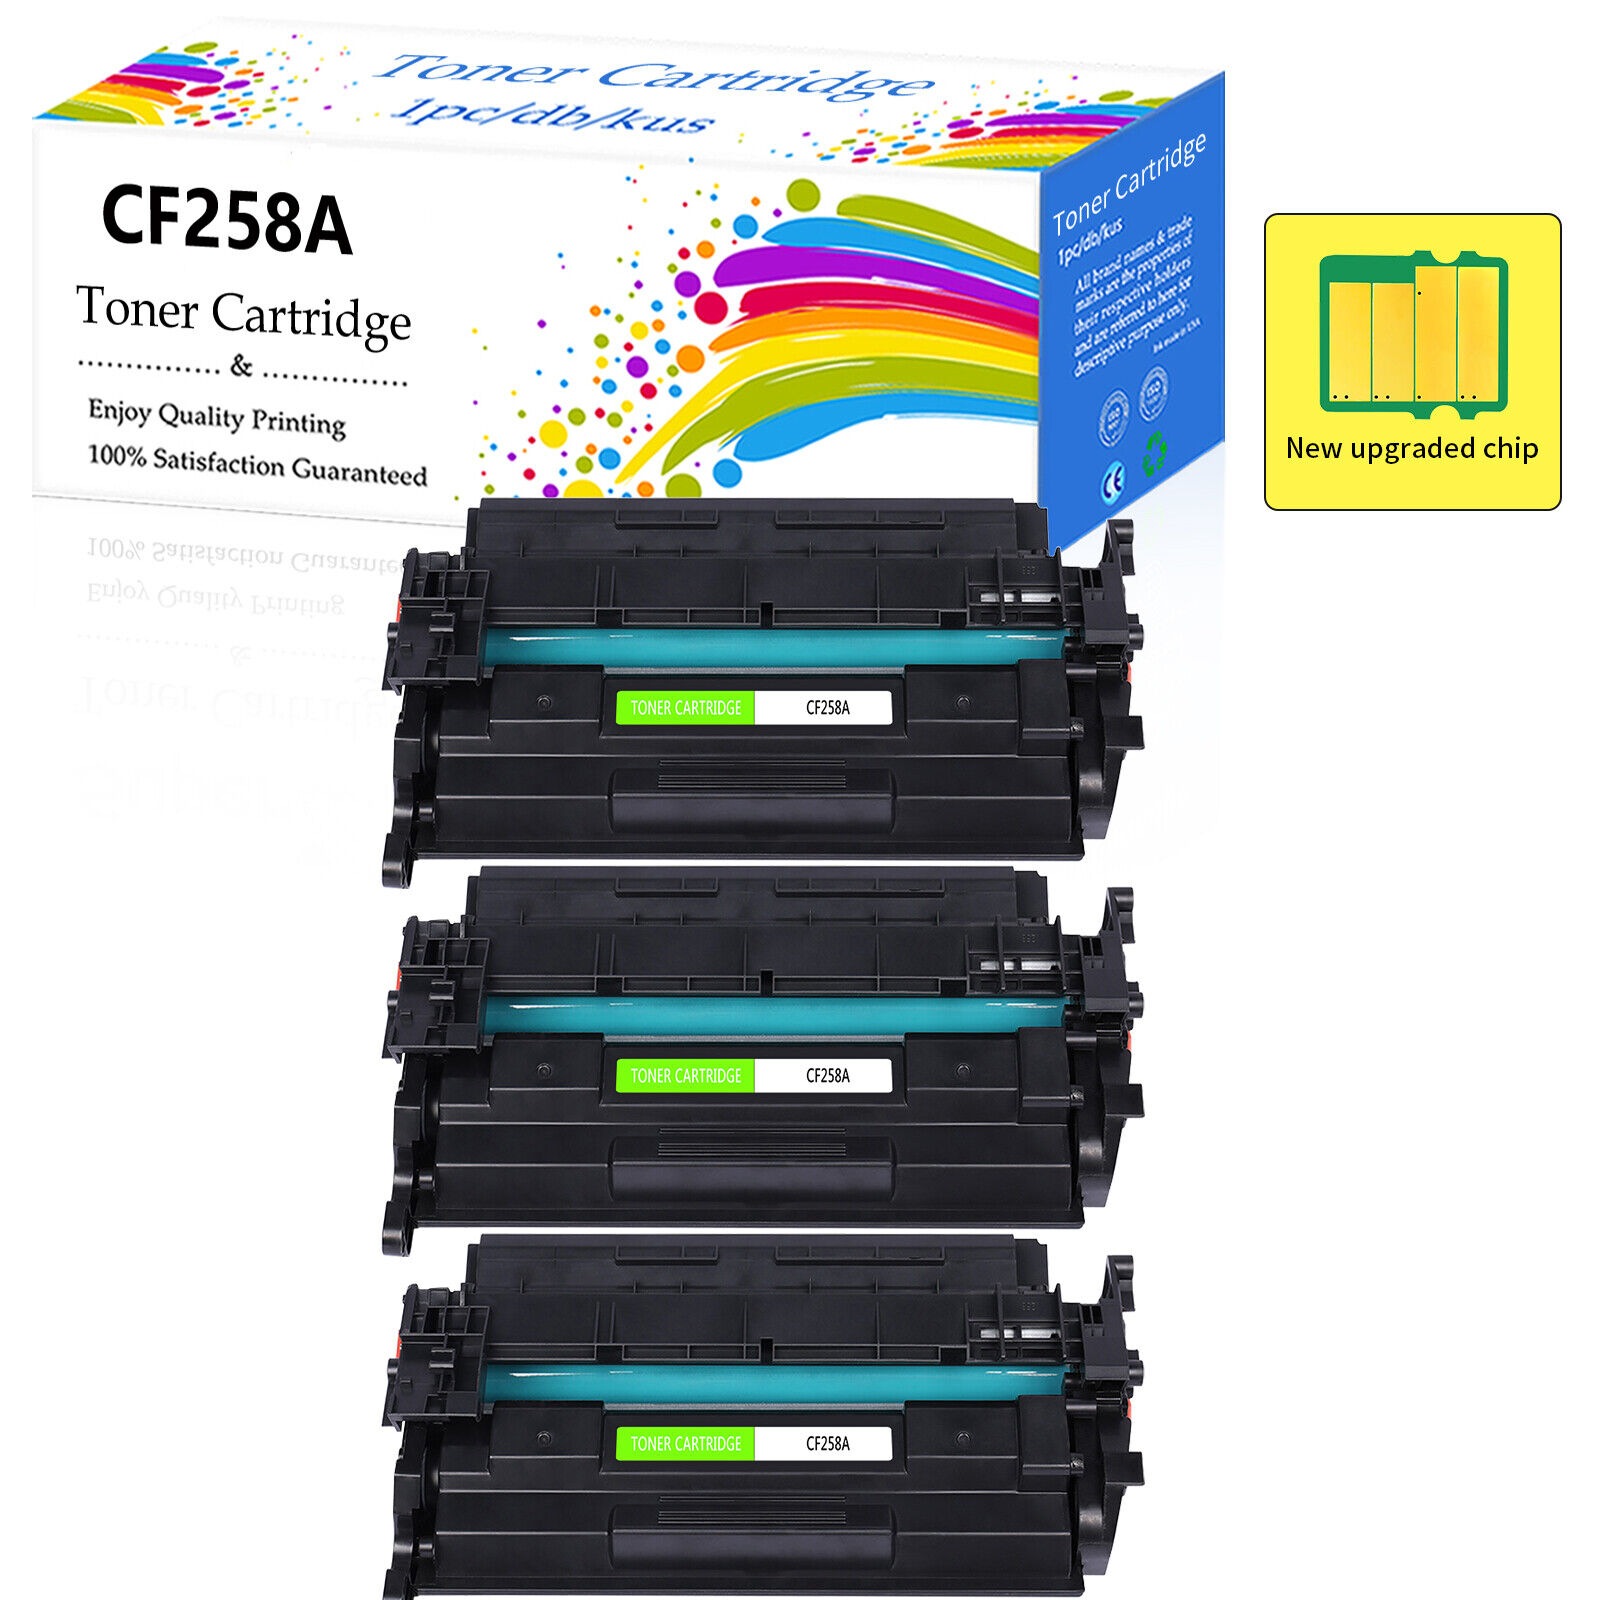 3x CF258A 58A Toner Cartridge for HP 58A LaserJet Pro M404n M404dw with new chip